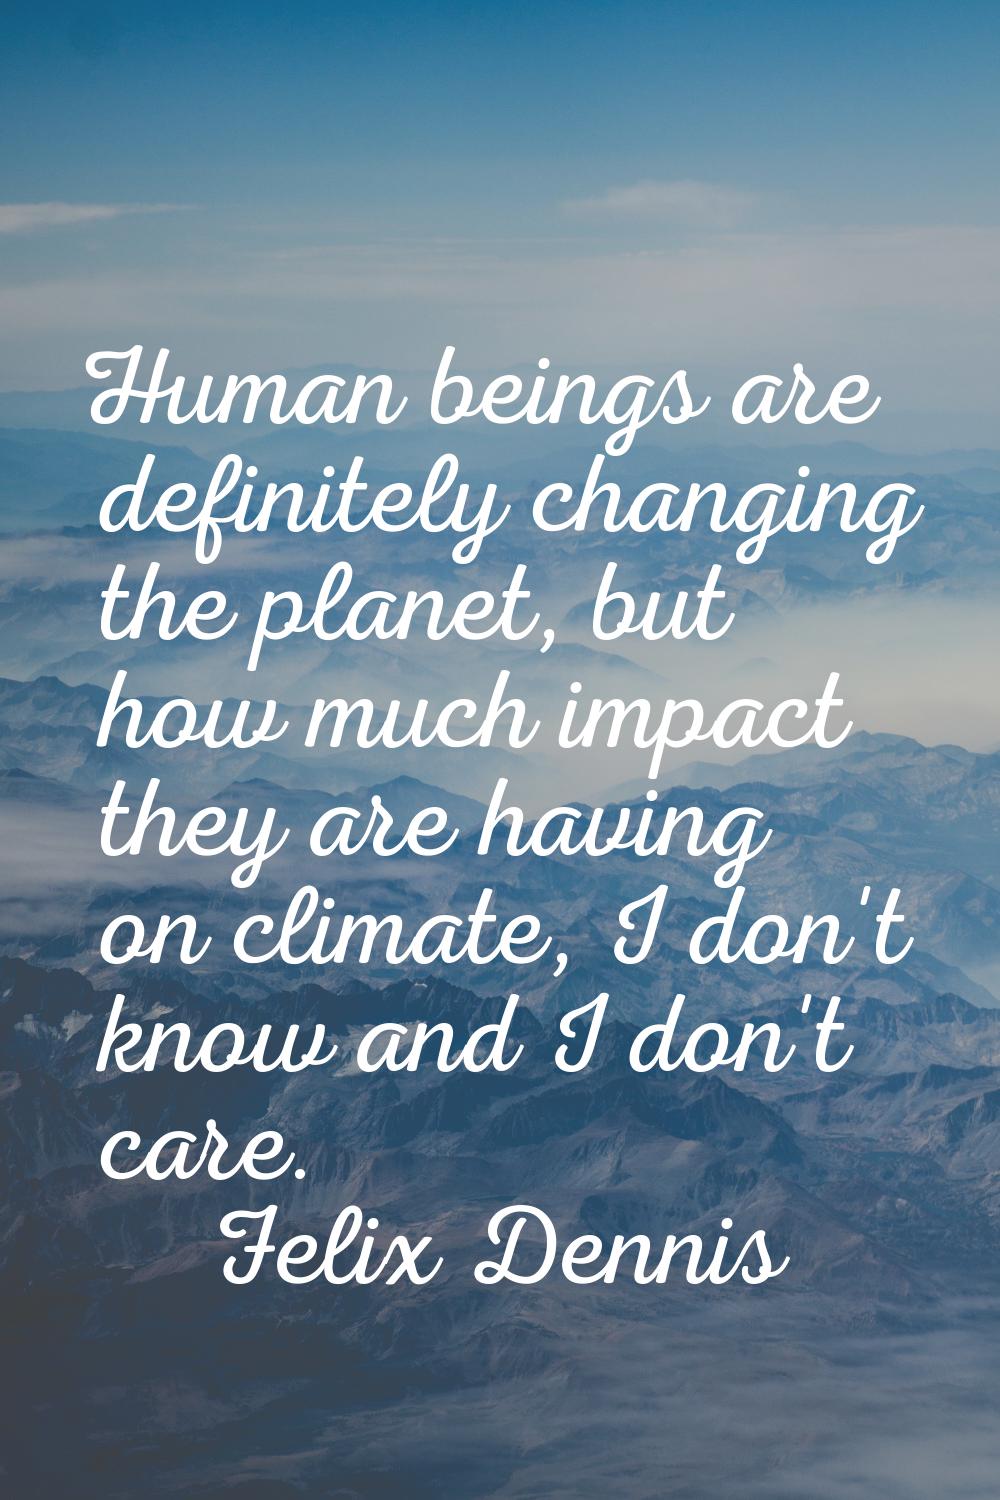 Human beings are definitely changing the planet, but how much impact they are having on climate, I 